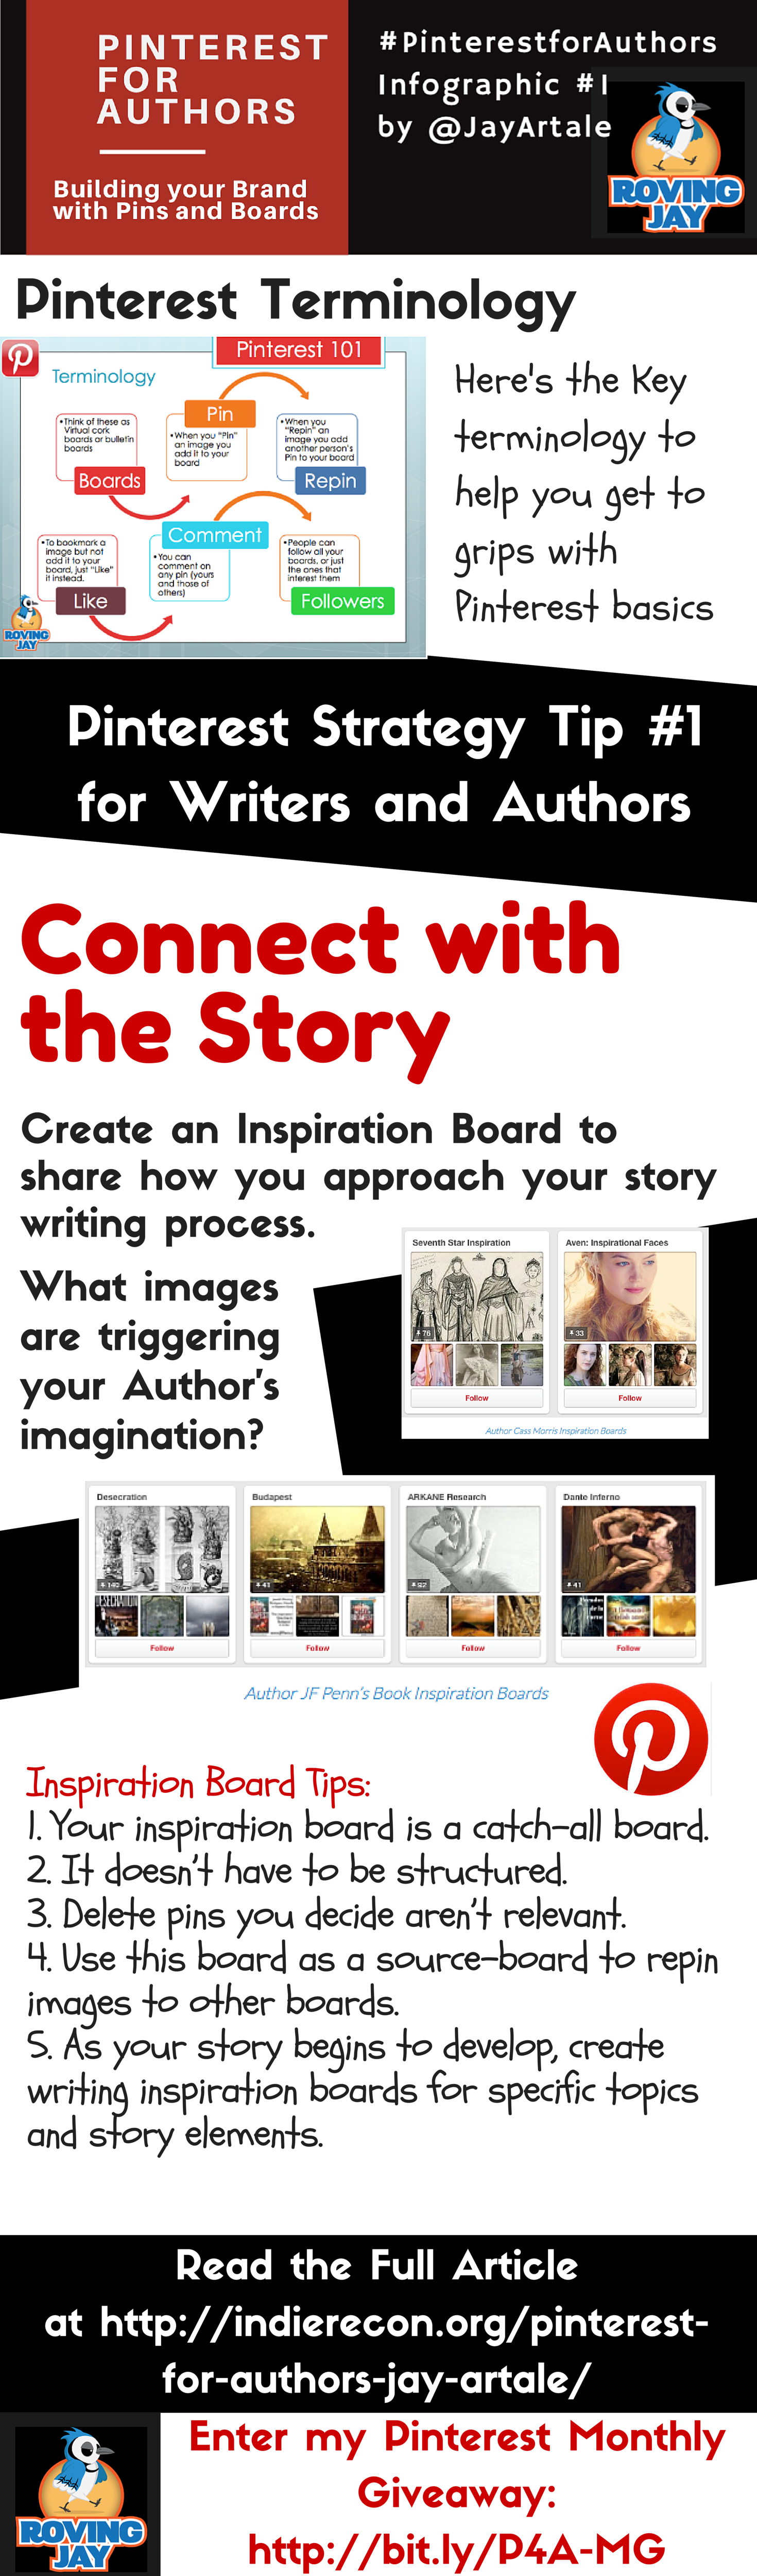 Pinterest for Authors Infographic #1 Jay Artale Connect with the Story